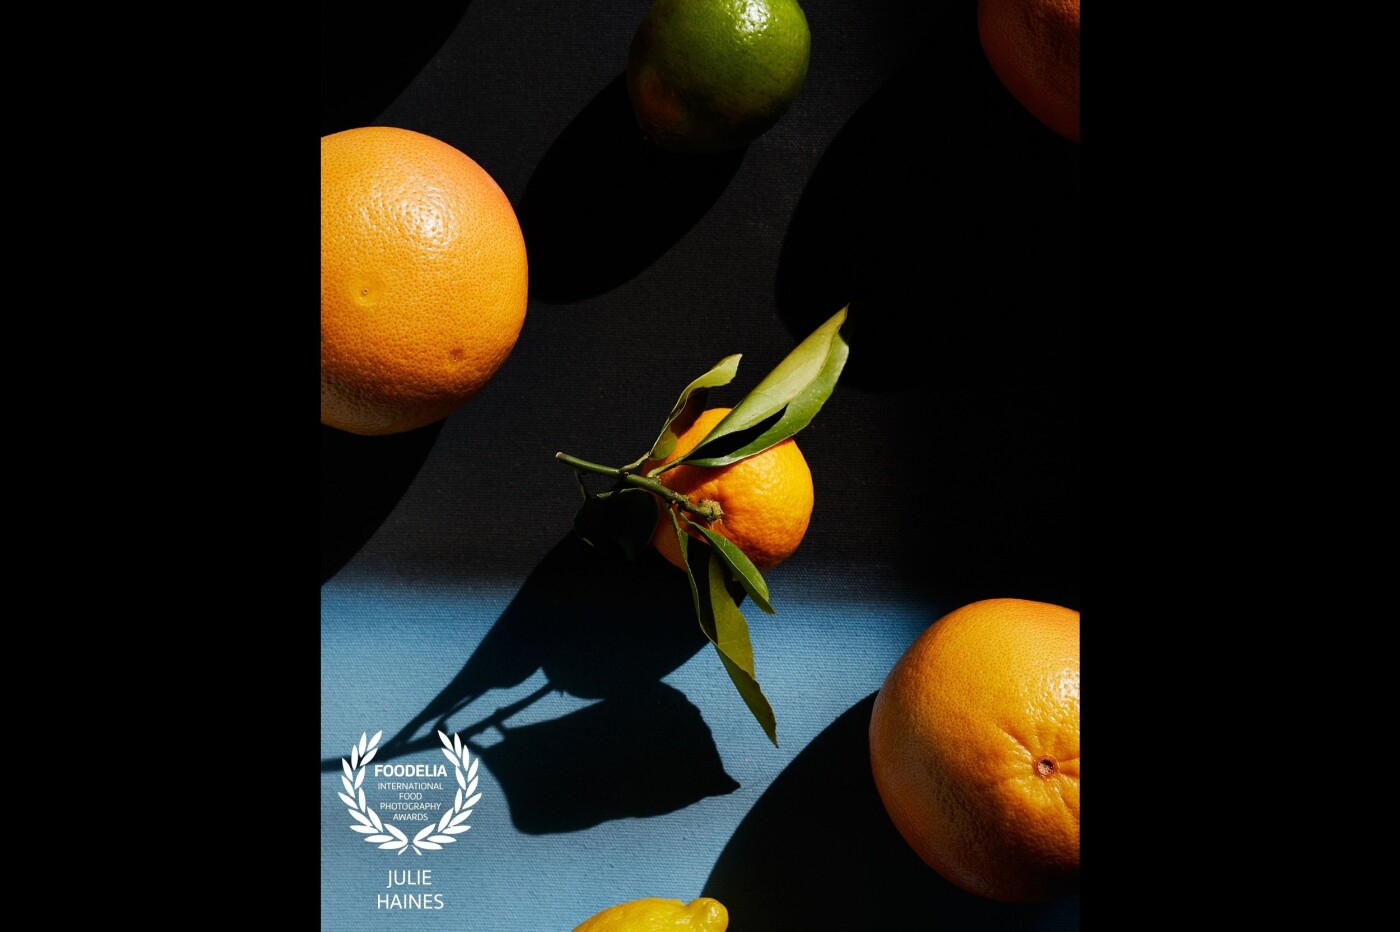 When your oranges look like they're in outer space - I love to capture hard light  - the dark shadows are mysterious and the shadow plays intriguing. 